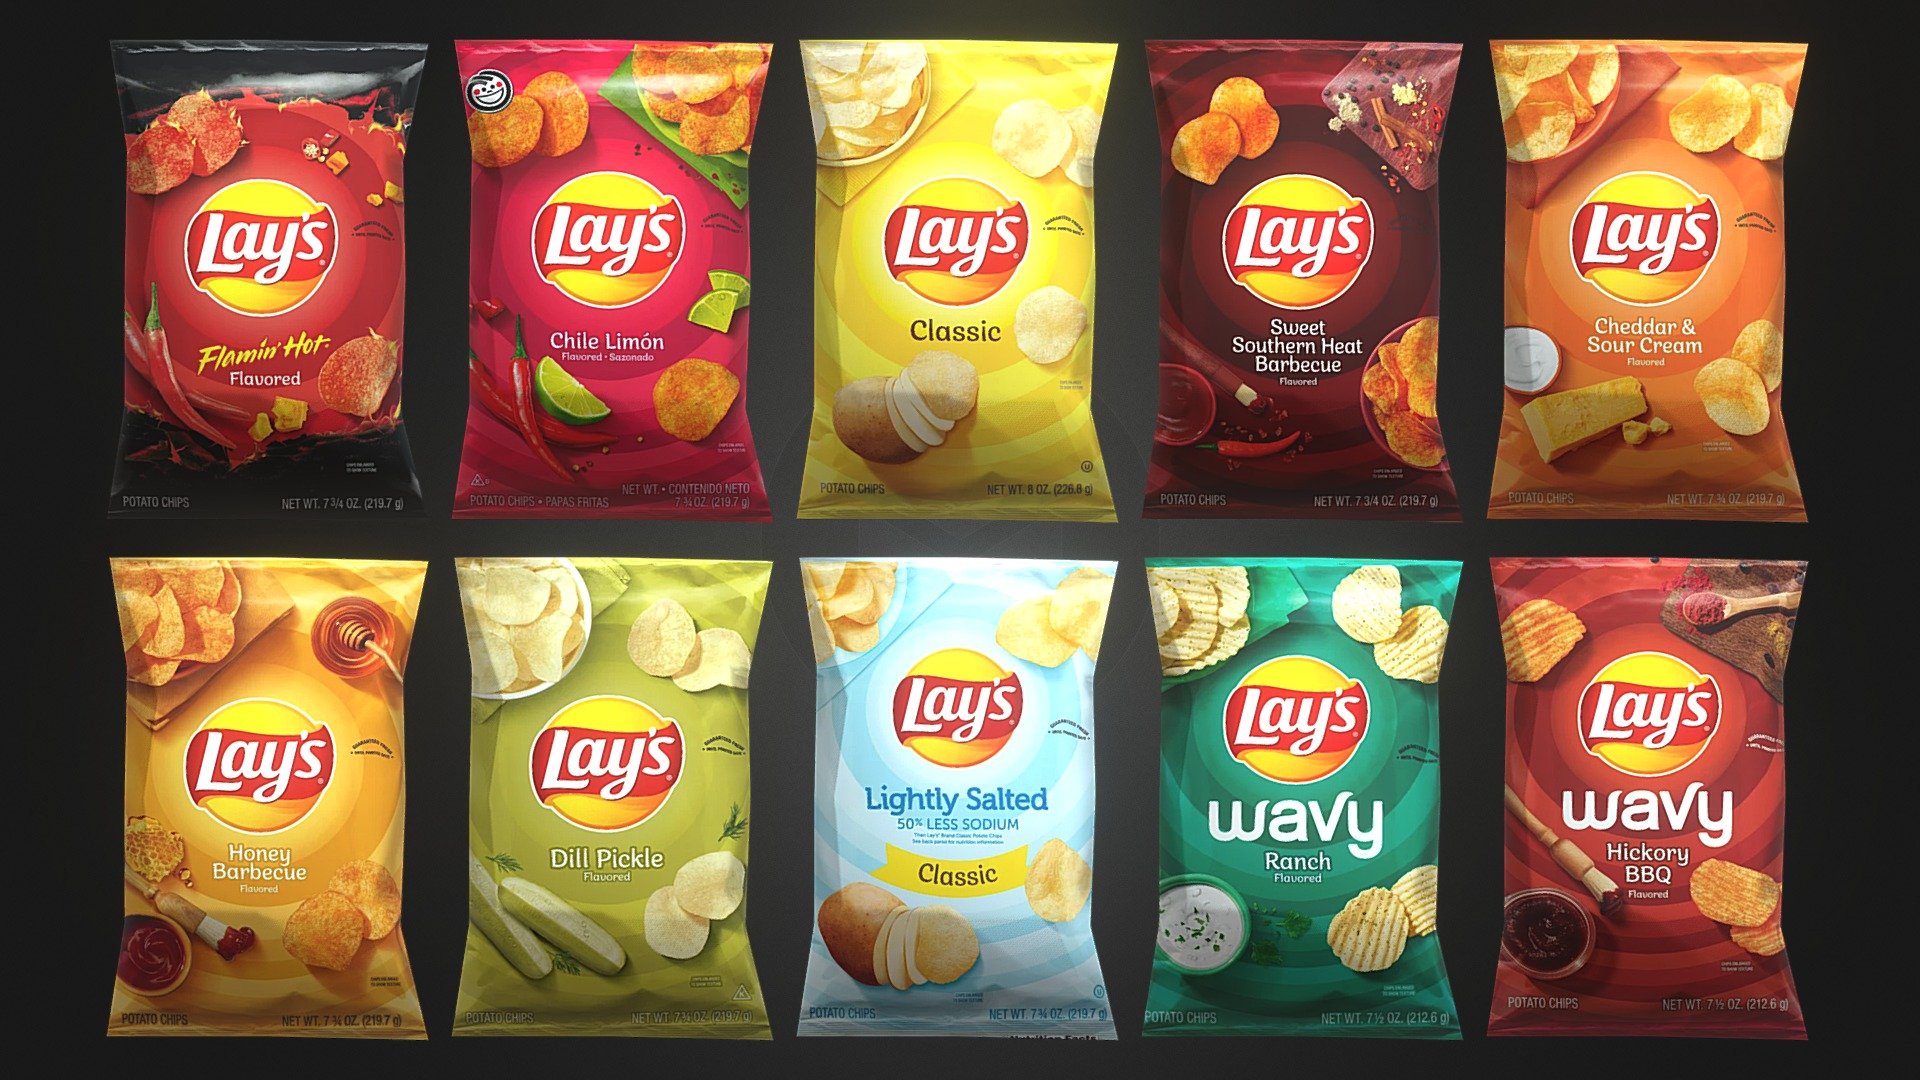 Multiple Bags of Lays Chips Models
- Lays Classic





Lays Classic Lightly Salted




Lays Sweet Southern Heat Barbecue




Lays Cheddar &amp; Sour Cream




Lays Chile Limon




Lays Flaming Hot




Lays Honey Barbecue




Lays Dill Pickle




Lays Wavy Ranch




Lays Wavy Hickory BBQ





Many Different Flavours, they are all listed Above.
All Models are Gameready and have their original sizes.
Potato Chips, Lays Original, Classic Lays, Lays Chips, Lays Crisps

Each bag only have 36 faces!

HD Textures are used for all the models. Free Models, Downloadable, Gameready, Lowpoly - Lays Bags | 10 Different Flavours!! | GAMEREADY - Download Free 3D model by NKaap 3d model